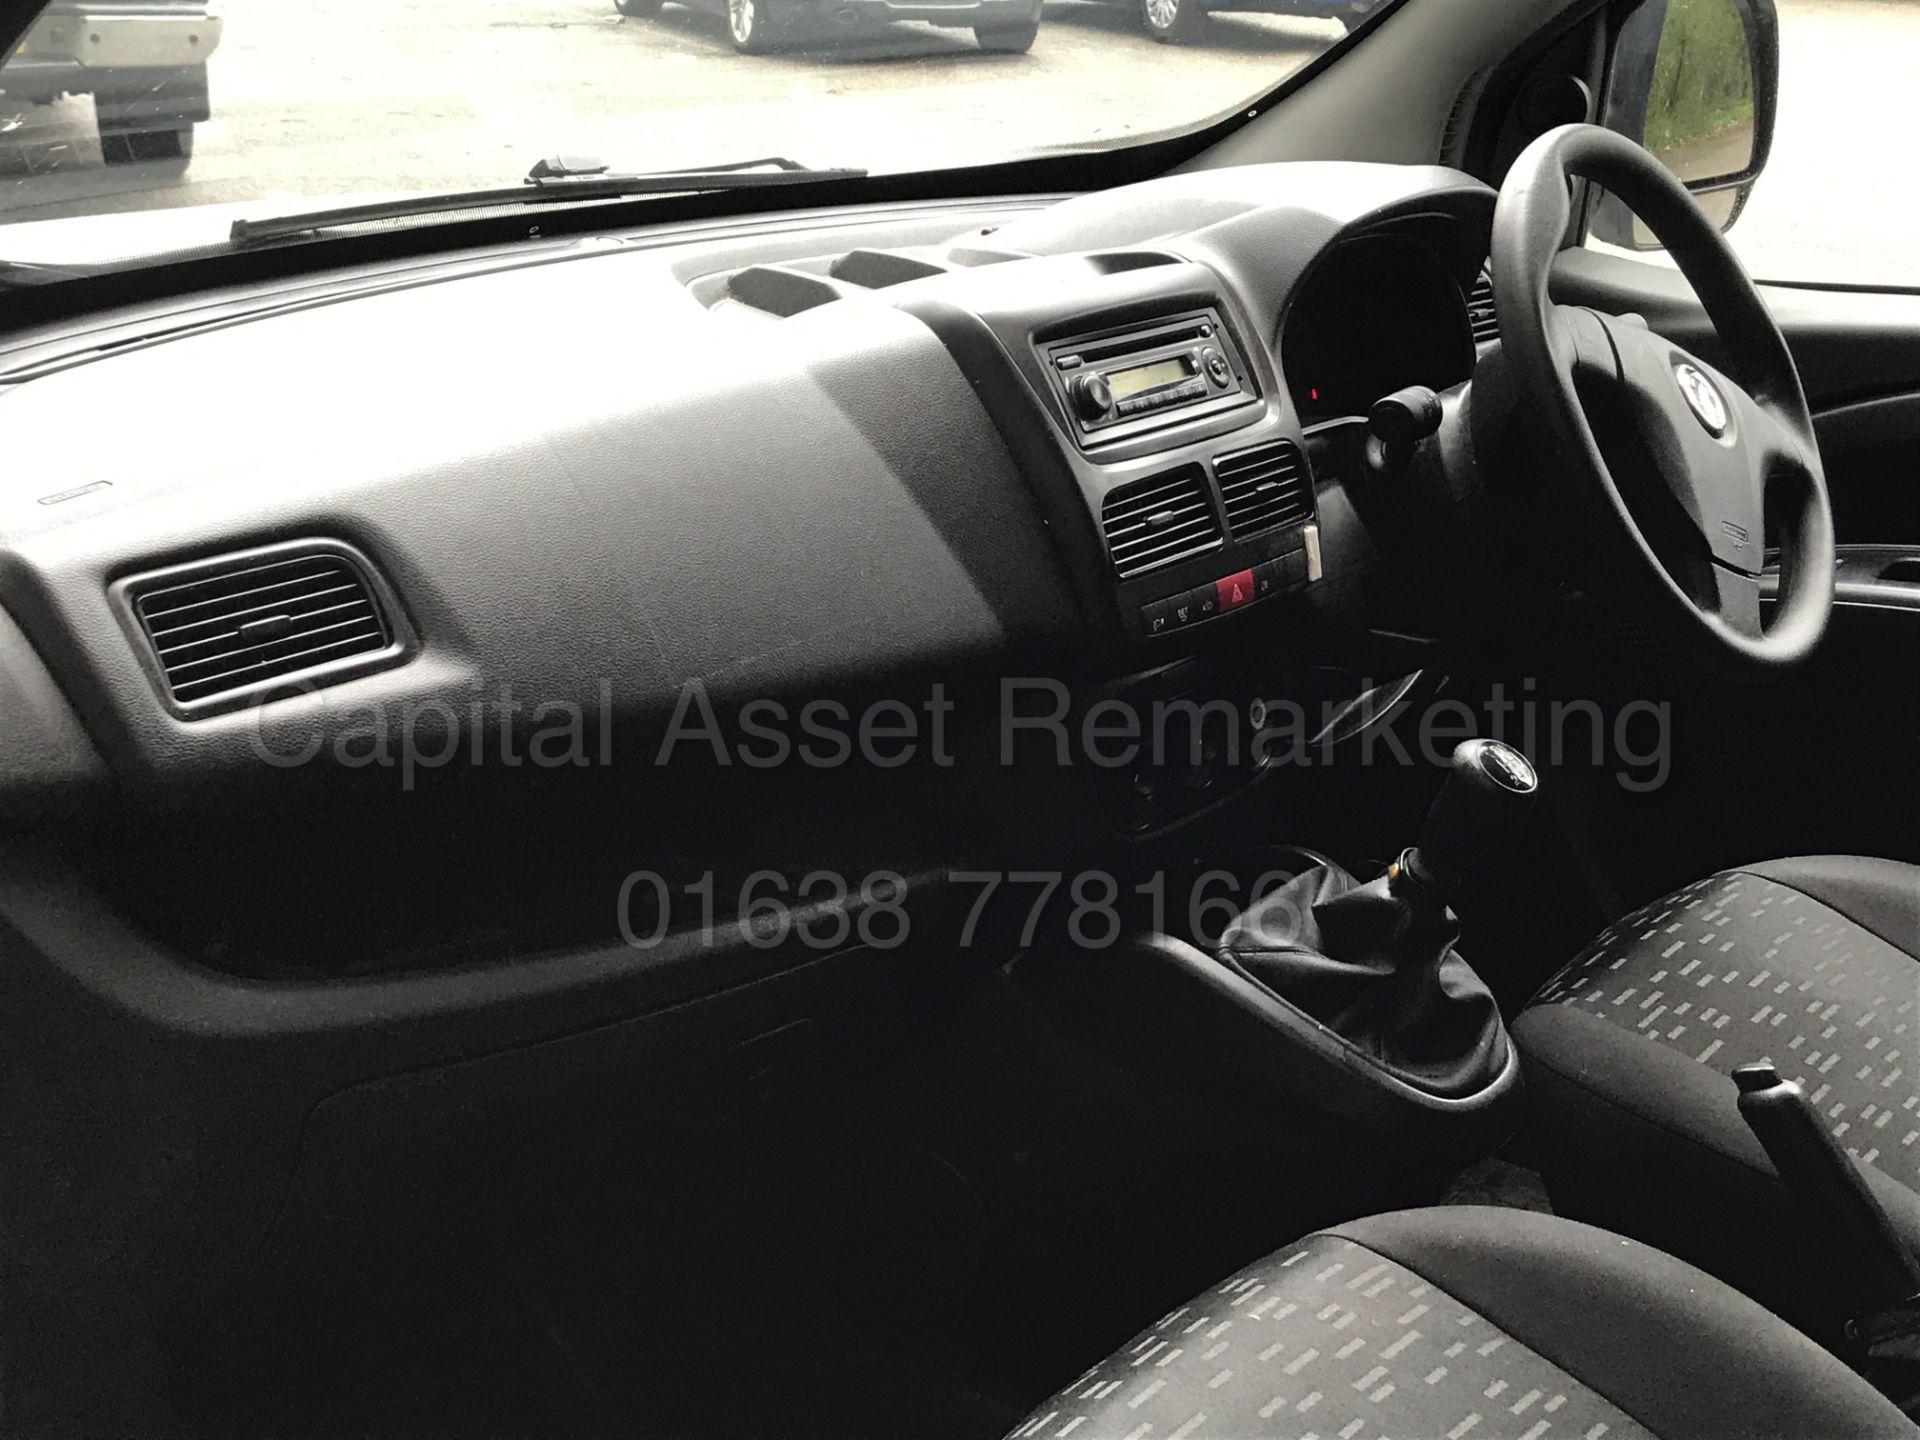 VAUXHALL COMBO 2000 L1H1 (2015 MODEL) 'CDTI - 90 BHP' (1 FORMER COMPANY OWNER FROM NEW) *50 MPG+* - Image 13 of 25